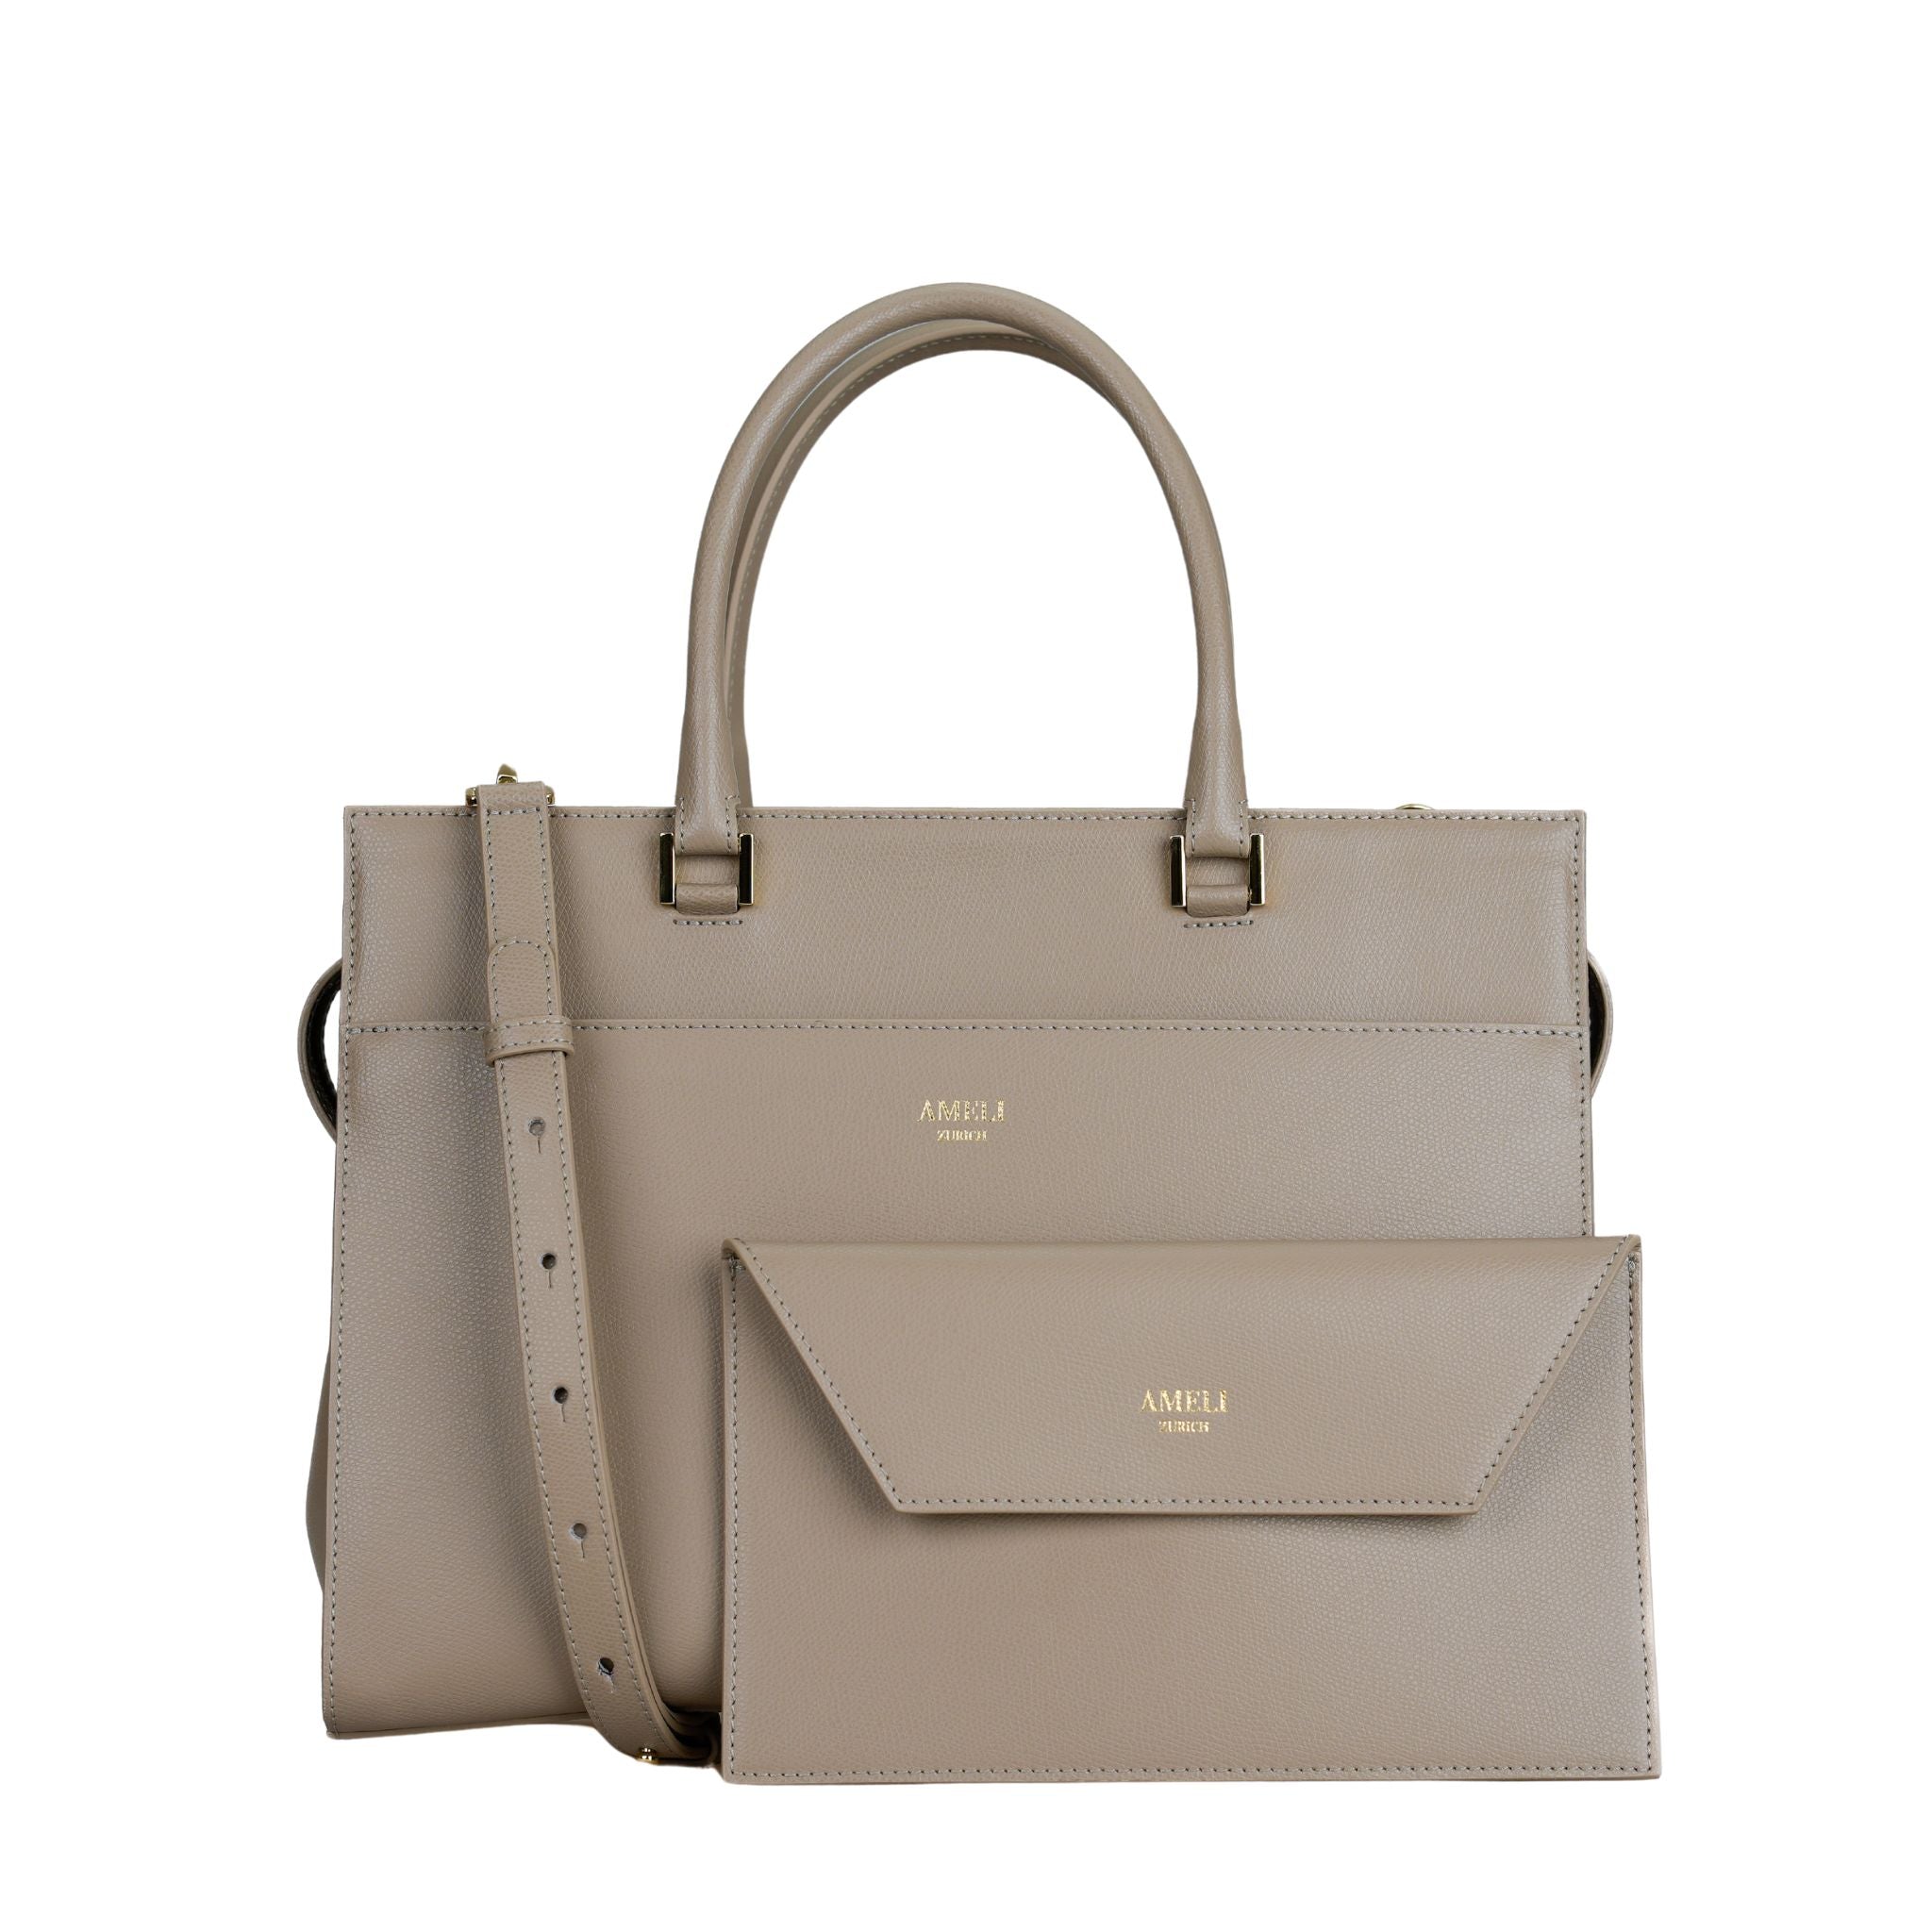 AMELI Zurich | CENTRAL | Cappuccino | Pebbled Leather | Laptop bag + Clutch